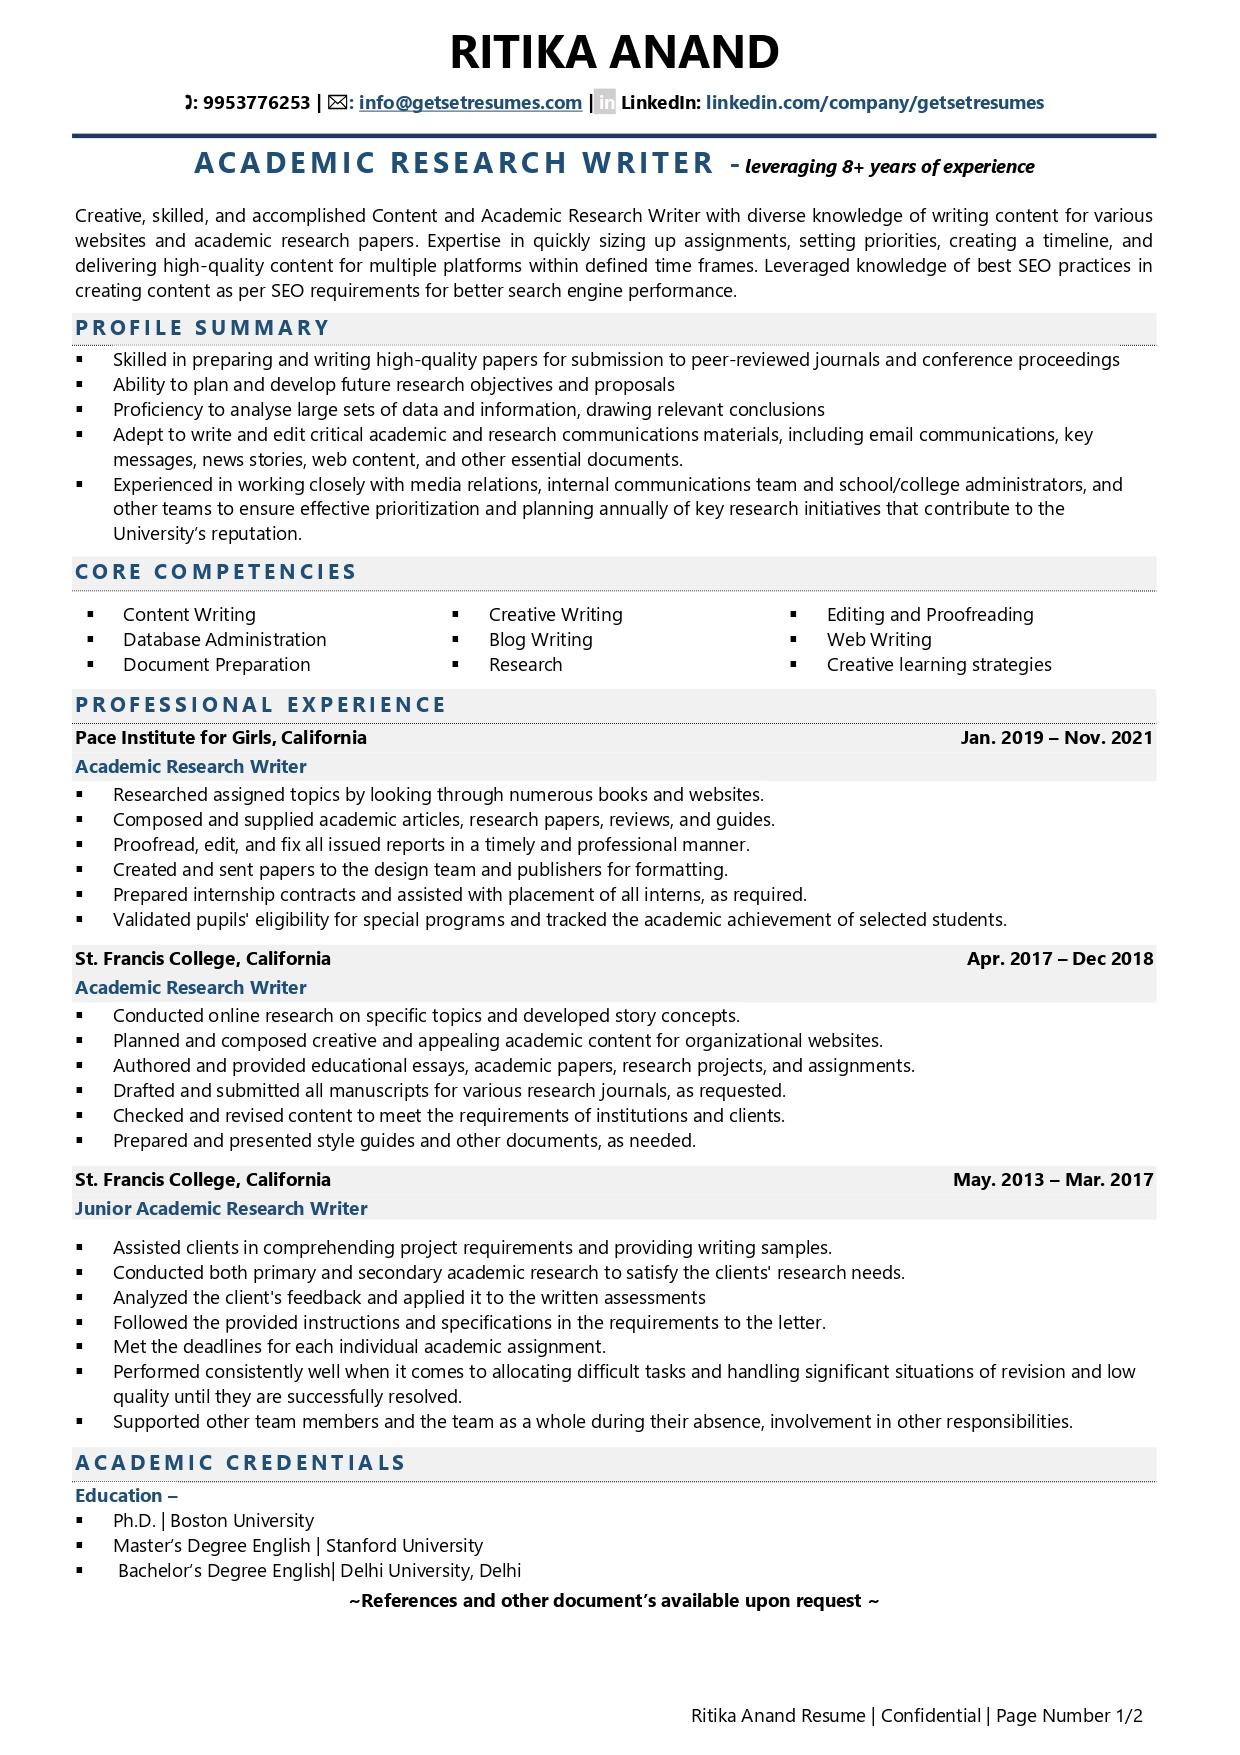 resume format for academic professional